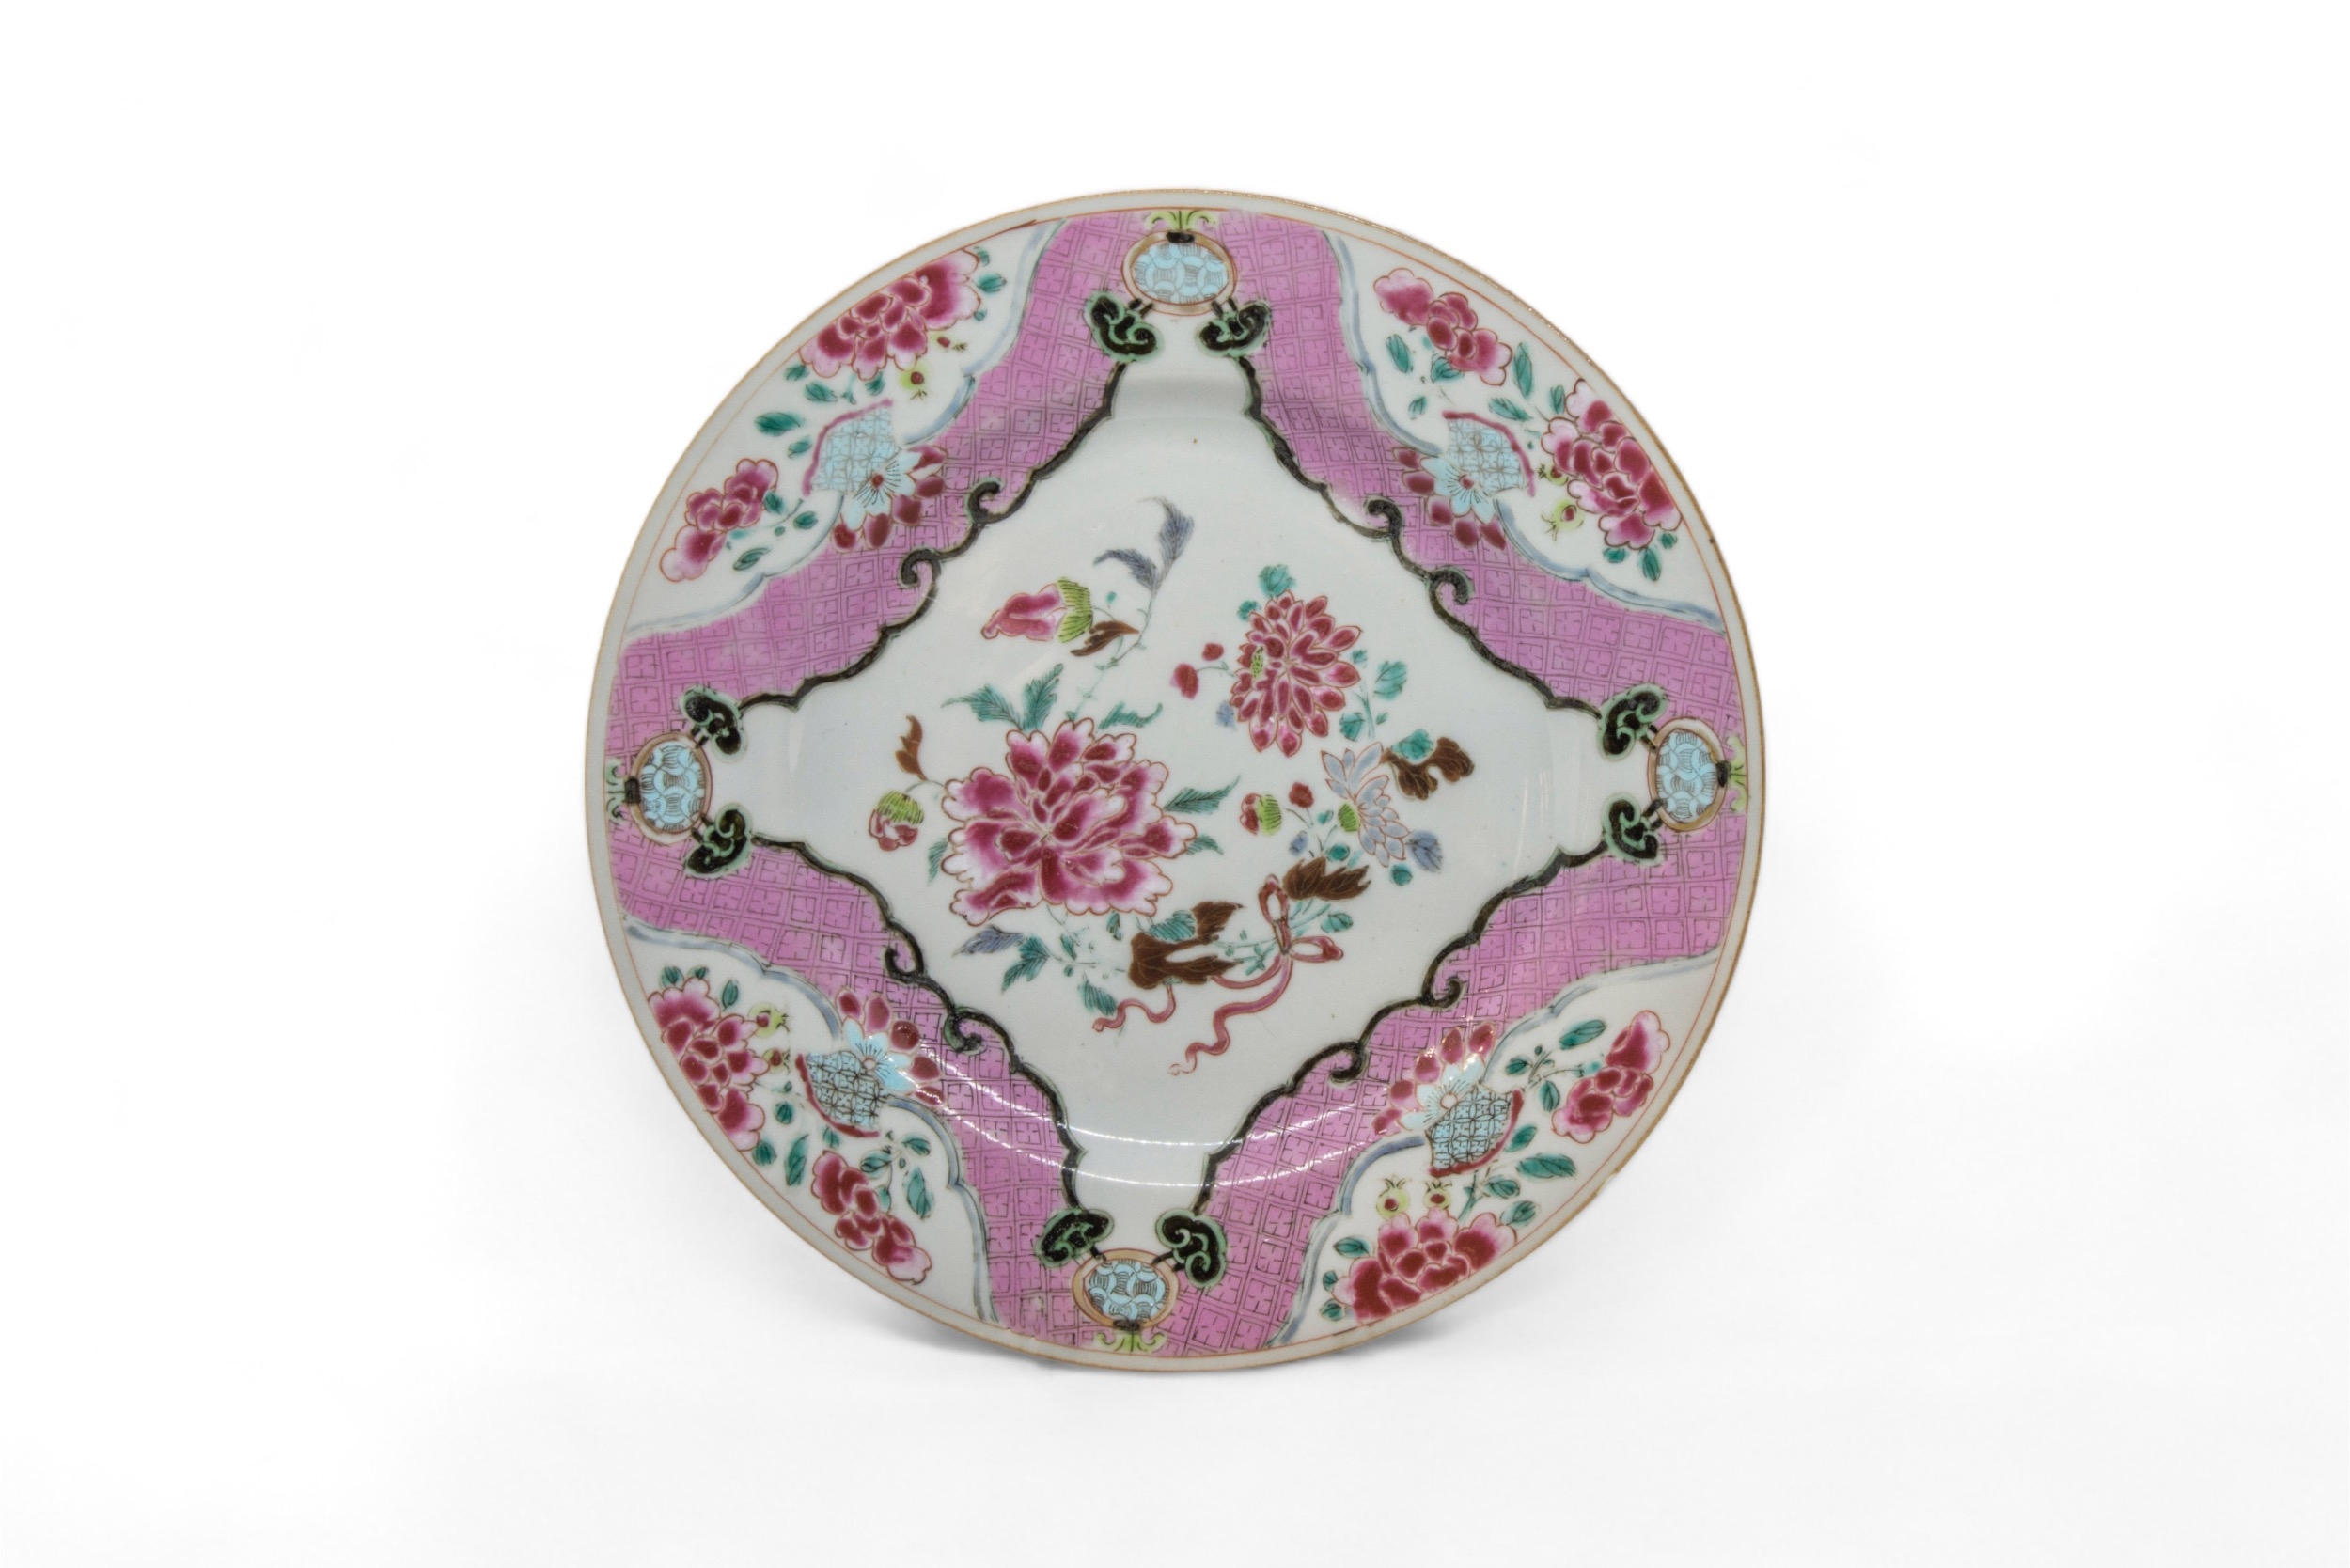 A GROUP OF TEN CHINESE EXPORT DISHES QING DYNASTY, 18TH CENTURY 23cm diam approx. - Image 9 of 11